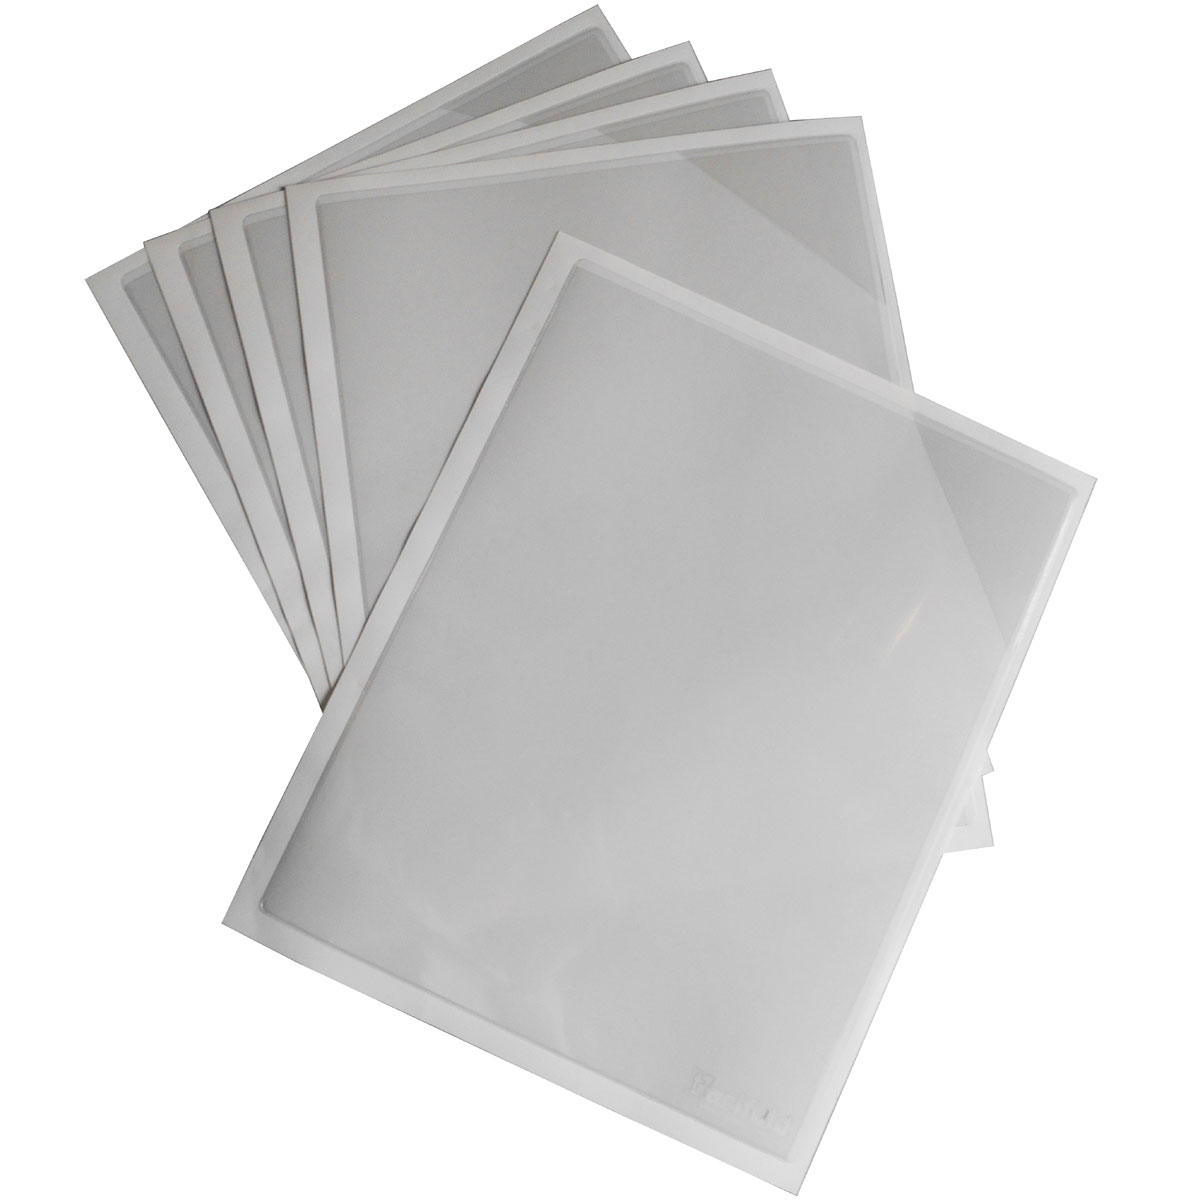 P194674 8.5 X 11 In. Easy Load Repositionable Pocket With Corner Closure, White - Pack Of 5